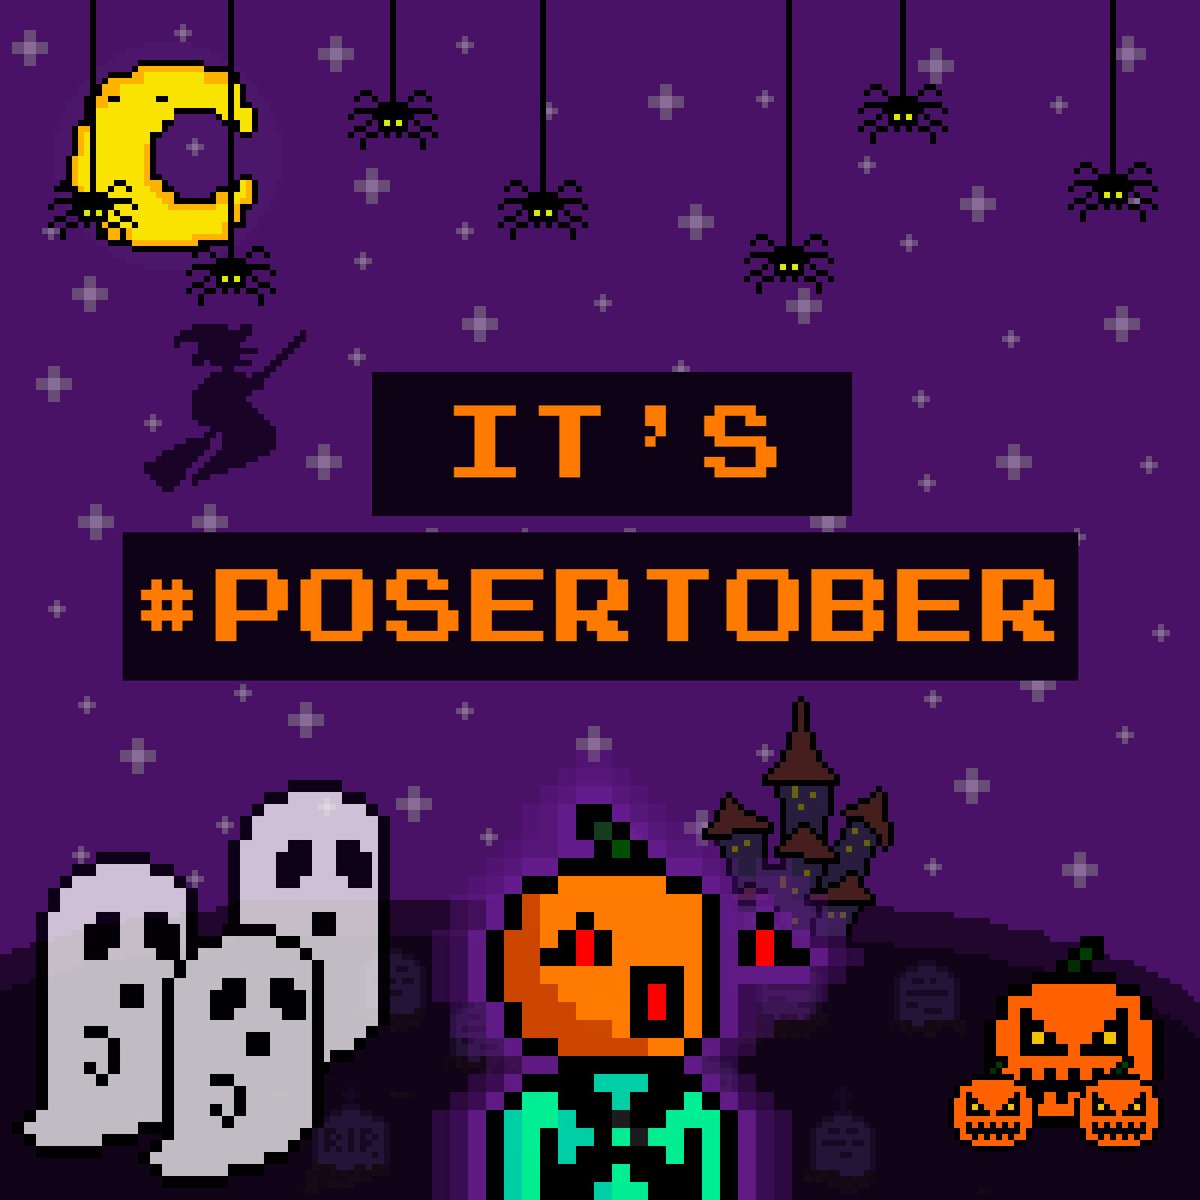 🎨It's POSERTOBER! 🎨 Create poser-related pixel art: 2D, animation or even 3D! There are no limits, use your imagination! Tweet your art using the #posertober tag Everyone participates! This is a real chance for anyone to join the Poser. The top 5 artworks get an award!